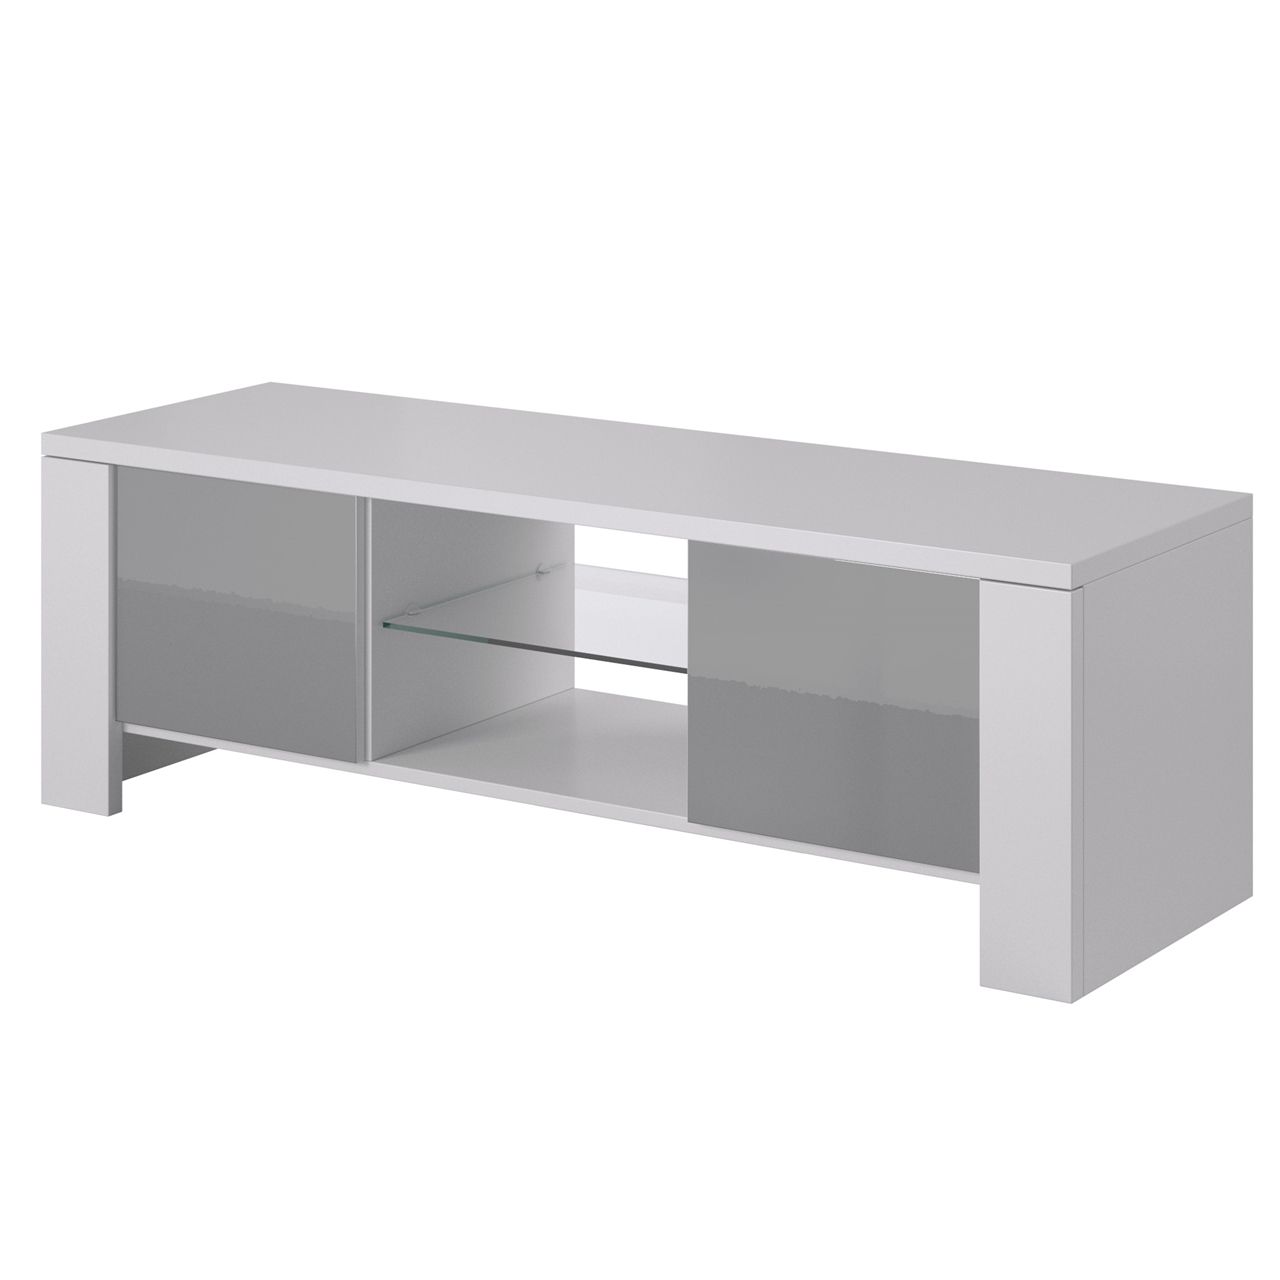 TV Stand WEST white / grey gloss